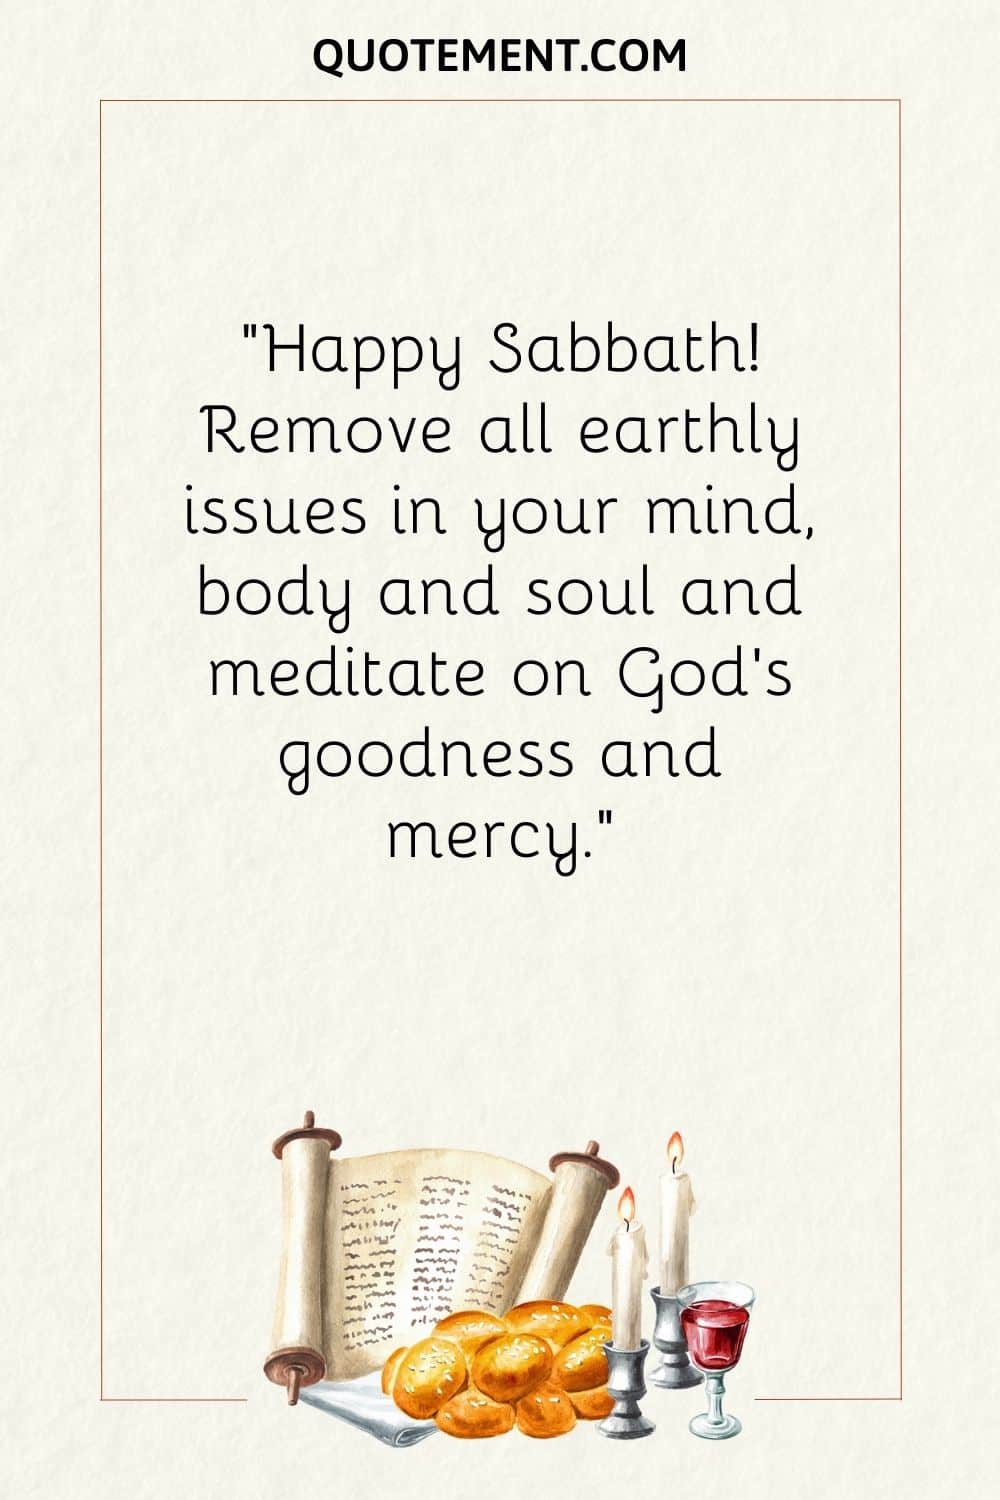 Remove all earthly issues in your mind, body and soul and meditate on God’s goodness and mercy